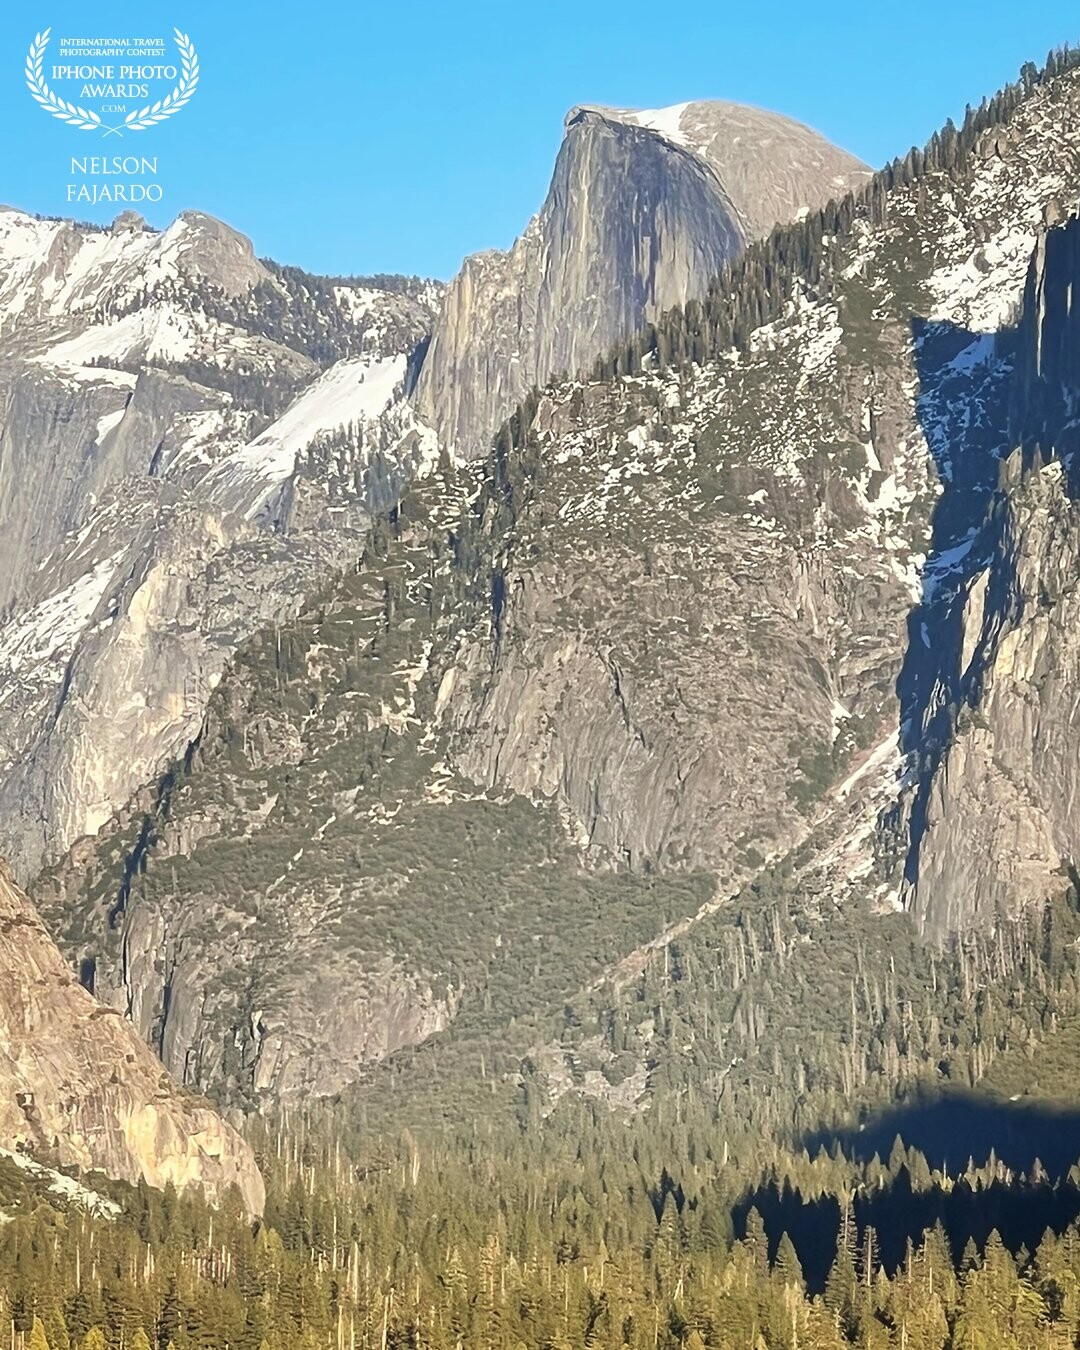 One of my favorite parks to visit and the most beautiful one that is. This was taken from the tunnel view,  taking a closer look at the half dome.